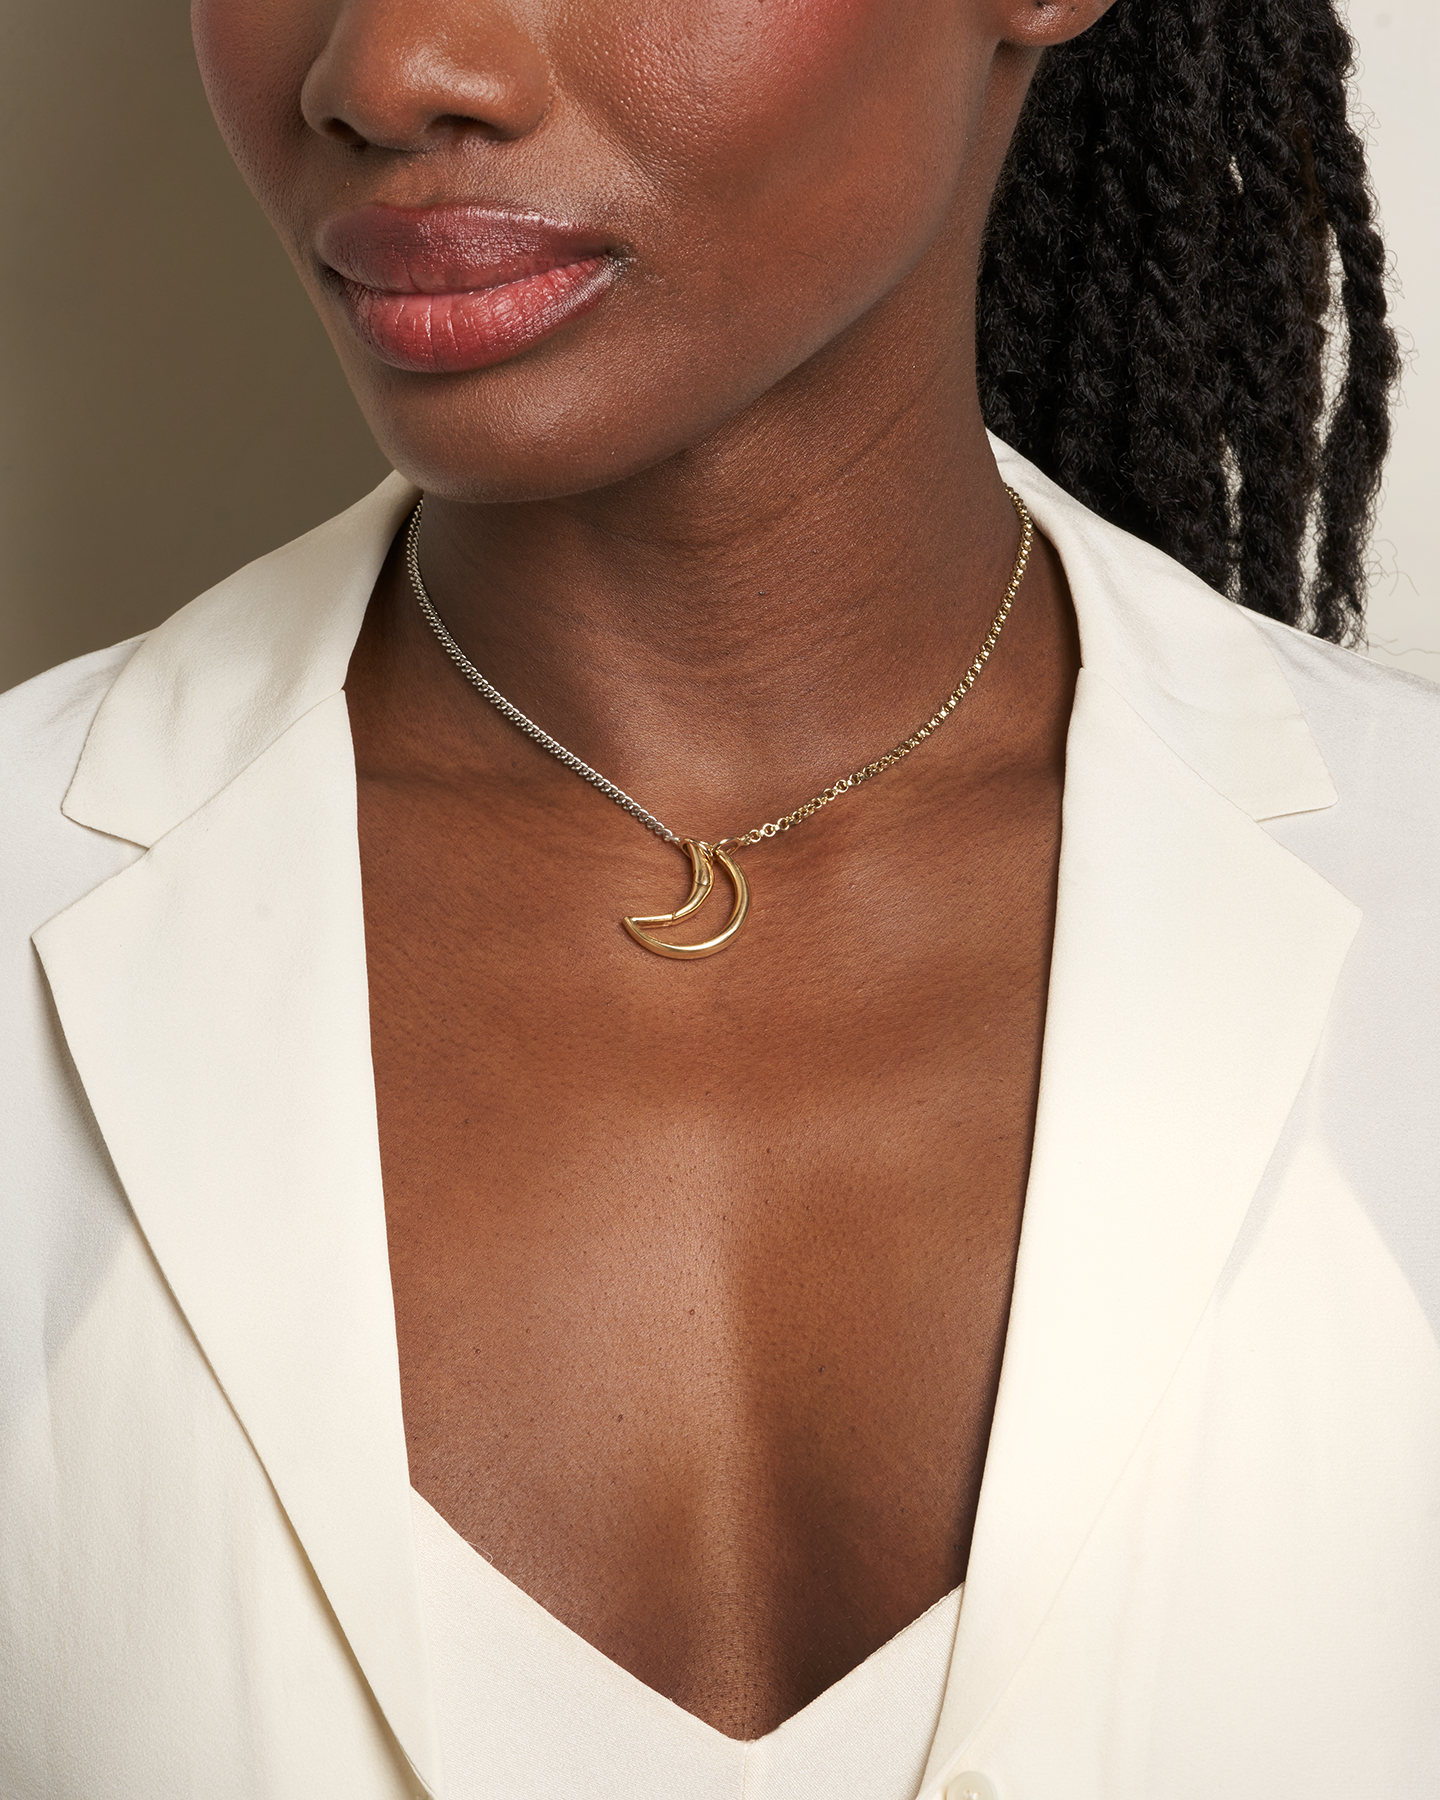 Gold Rolo Chain Necklace | Marla Aaron 15 / White Gold